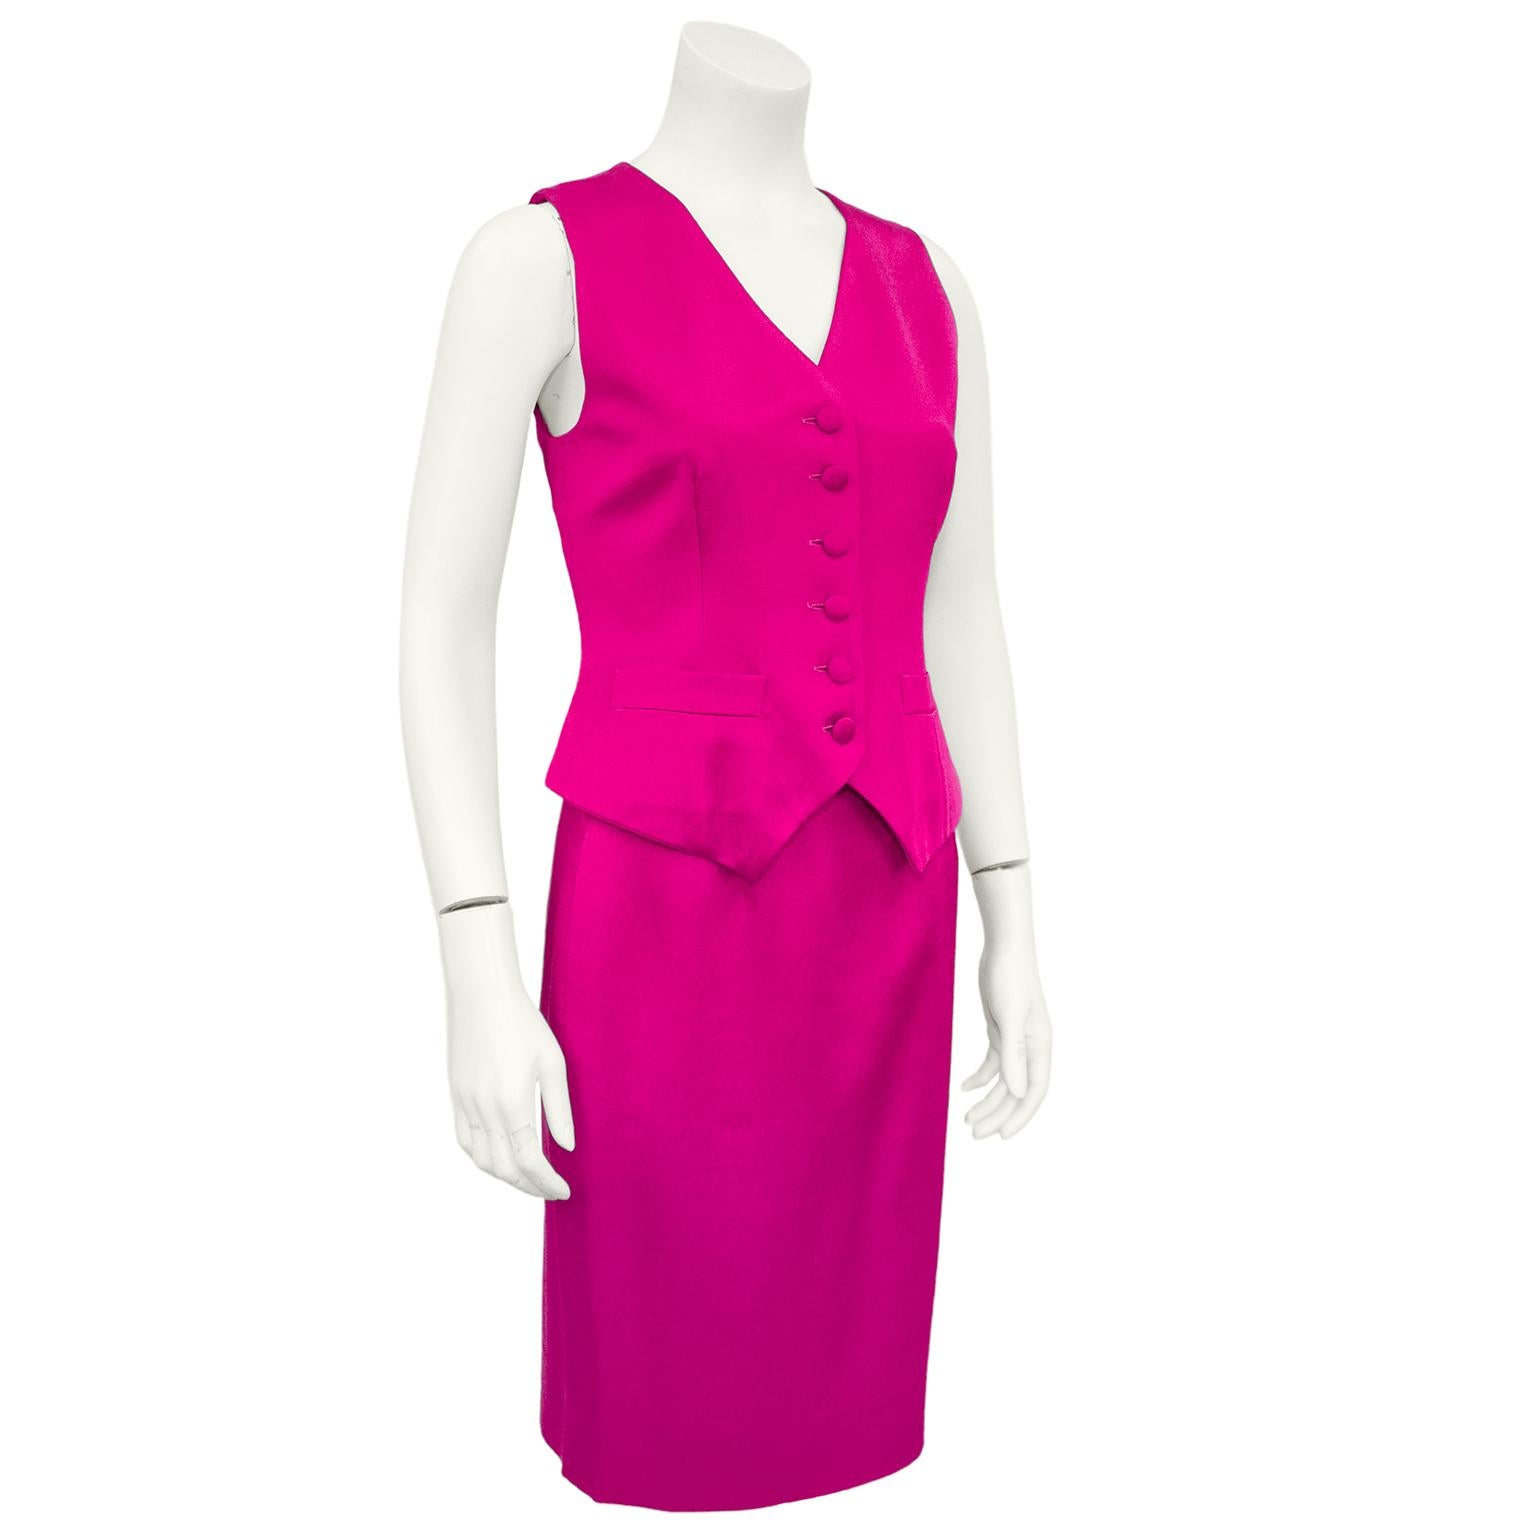 Fun and vibrant Moschino Couture! bright fuchsia ensemble from the 1990s. Ensemble features vest with v neckline, covered buttons and horizontal slit pockets. Skirt is a classic highwaisted pencil skirt with a zipper & button closure on the left